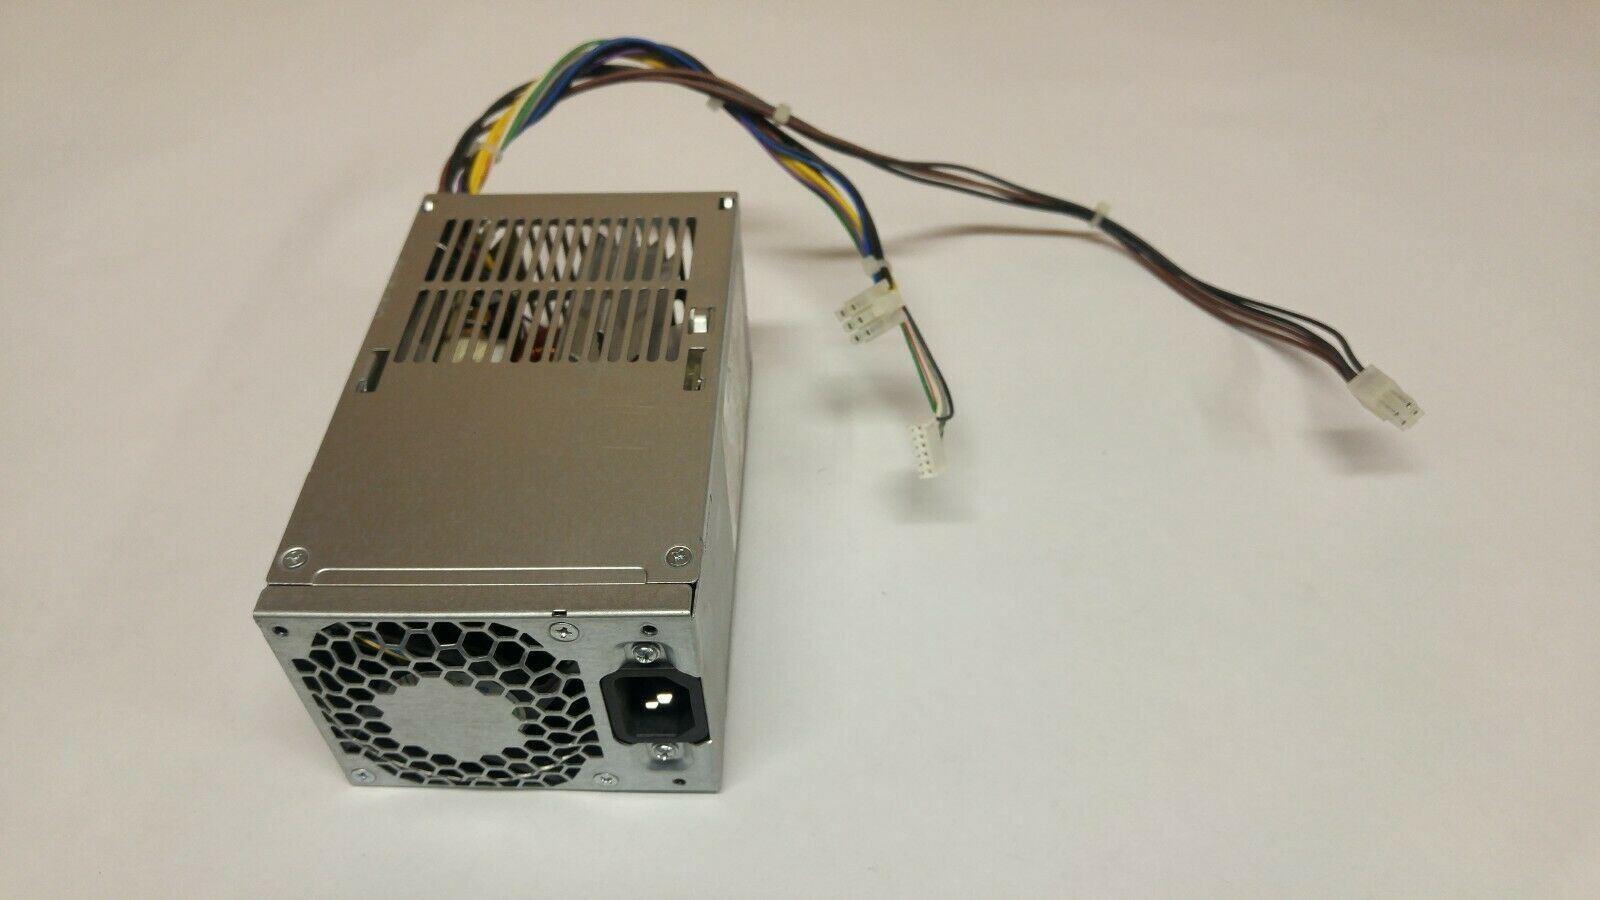 D12 240P1A PCC004 702309 002 751886 001 power supply output rated at 240 watts 12vdc output standard efficiency includes power on off switch for hp elitedesk small form factor sff pc